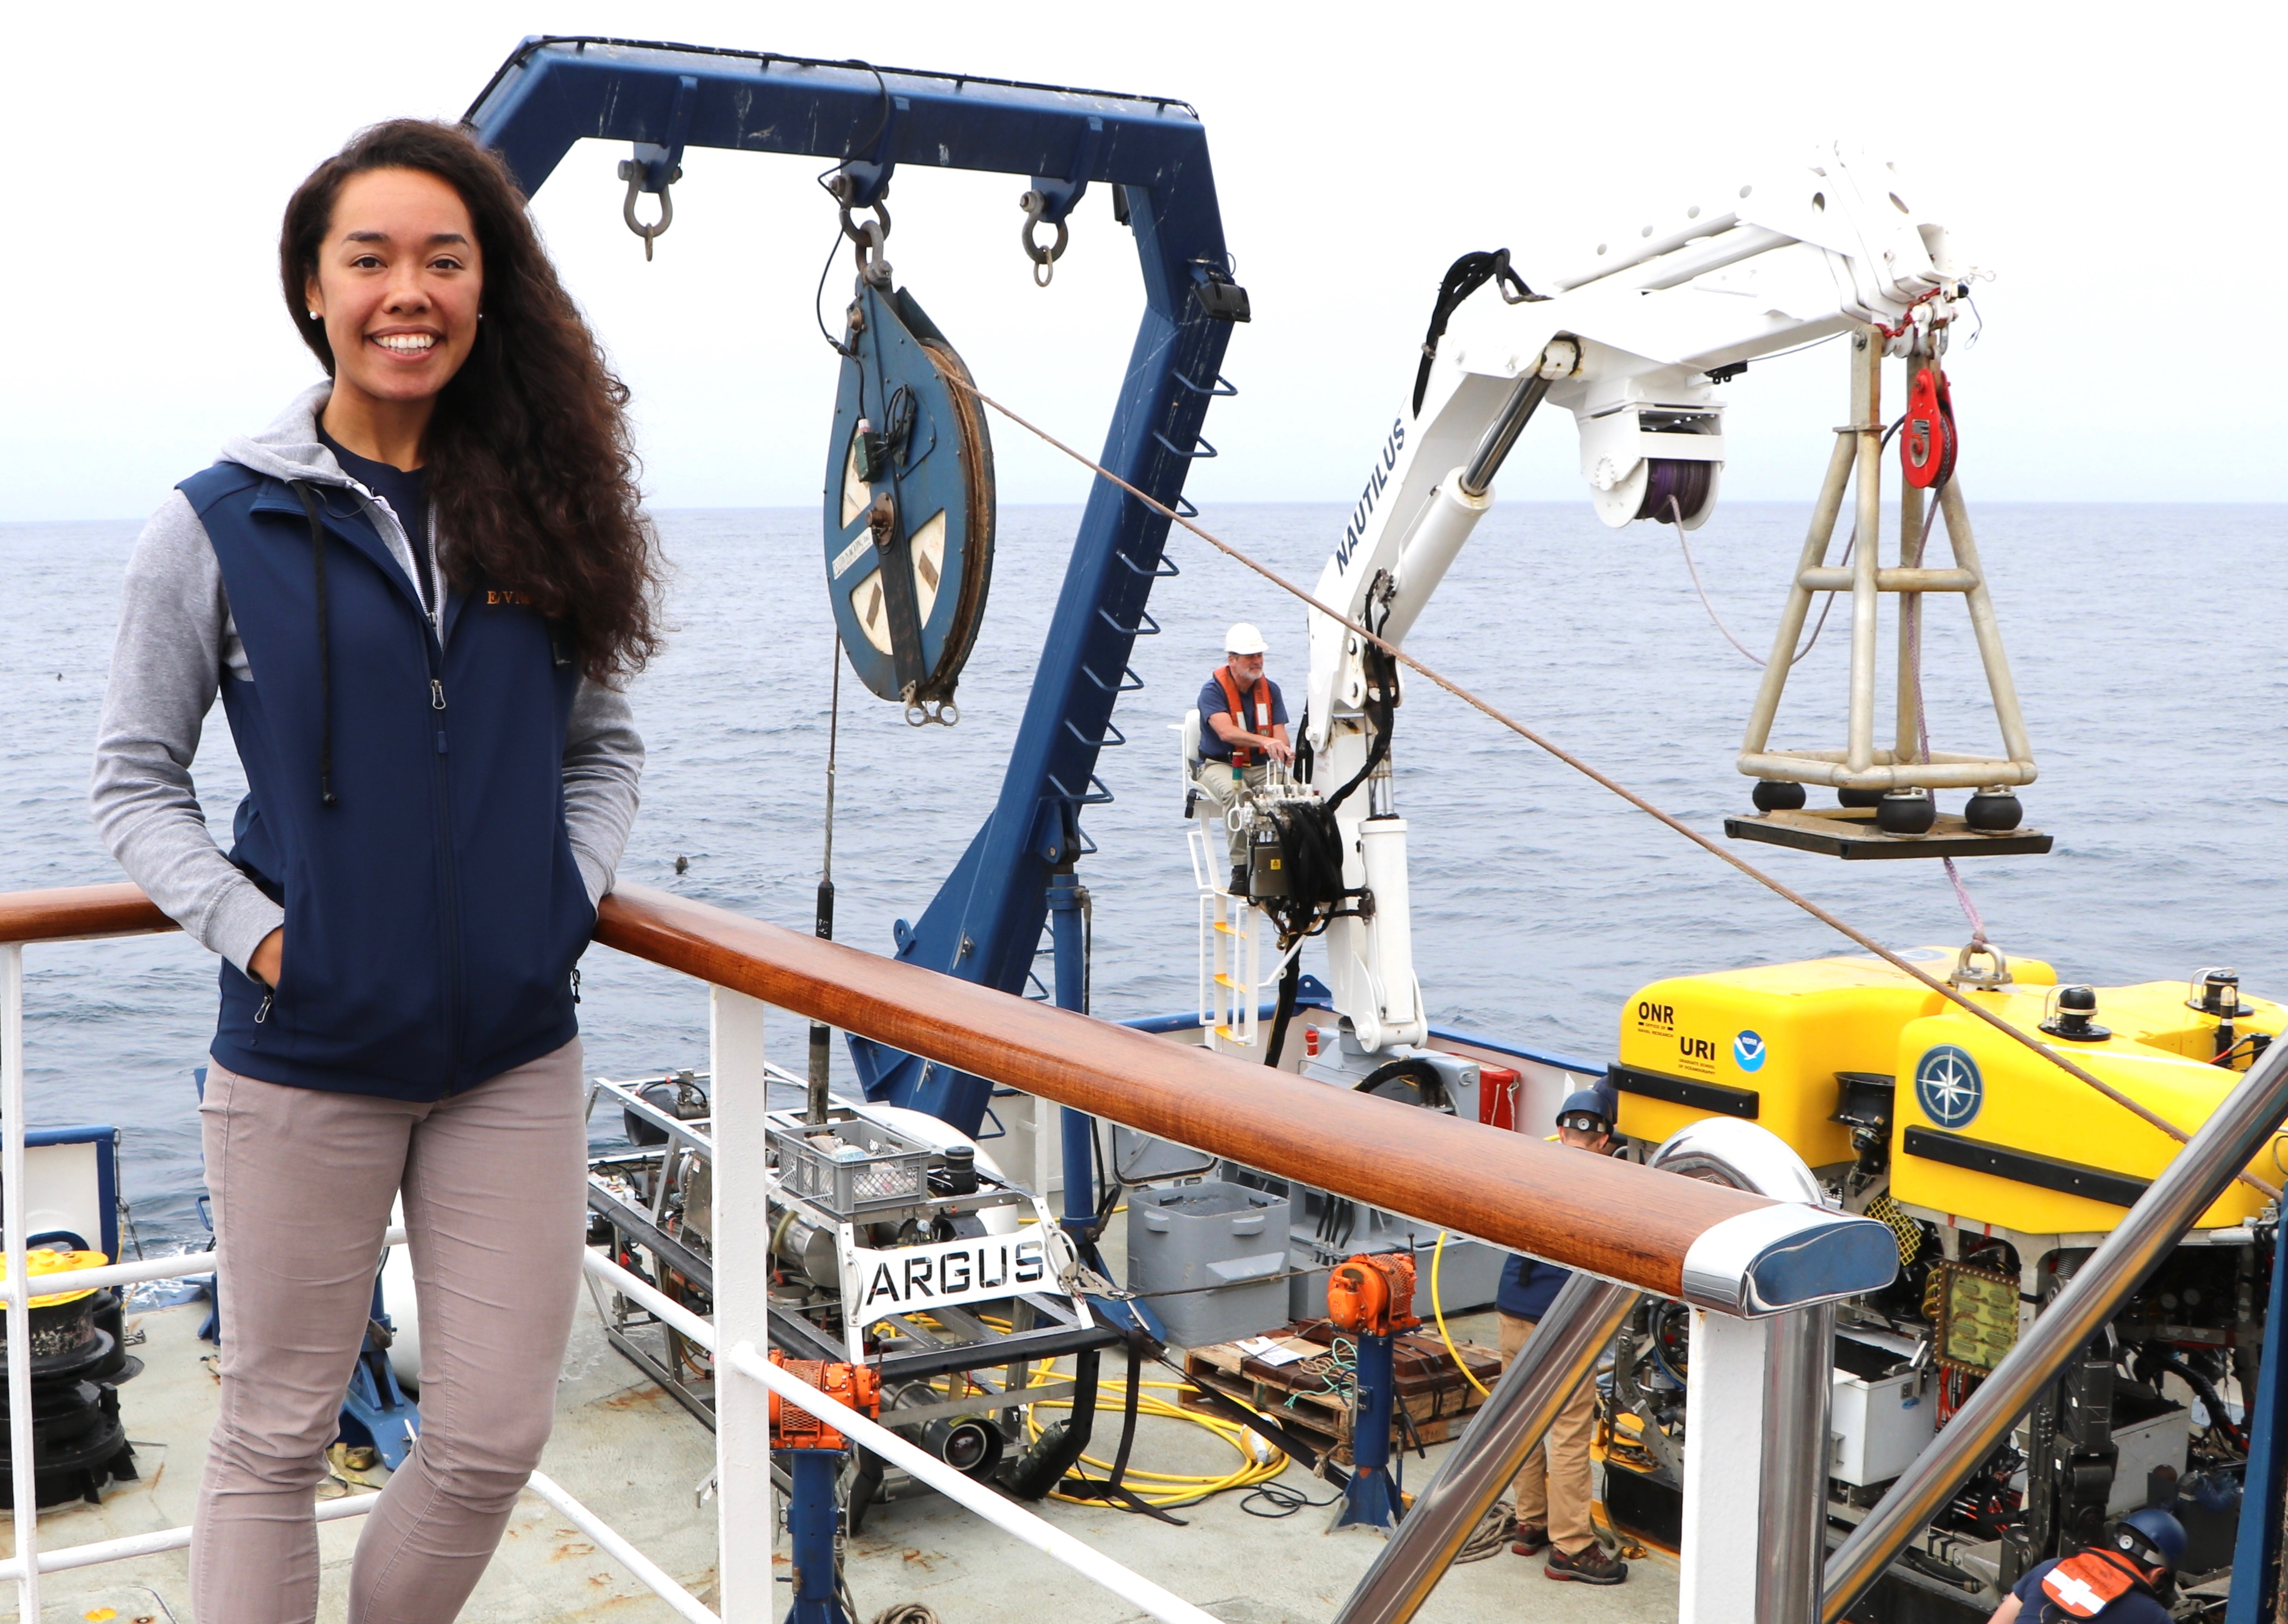 Carina standing on the second deck level of E/V Nautilus with crane and ROV Hercules + Argus in background.